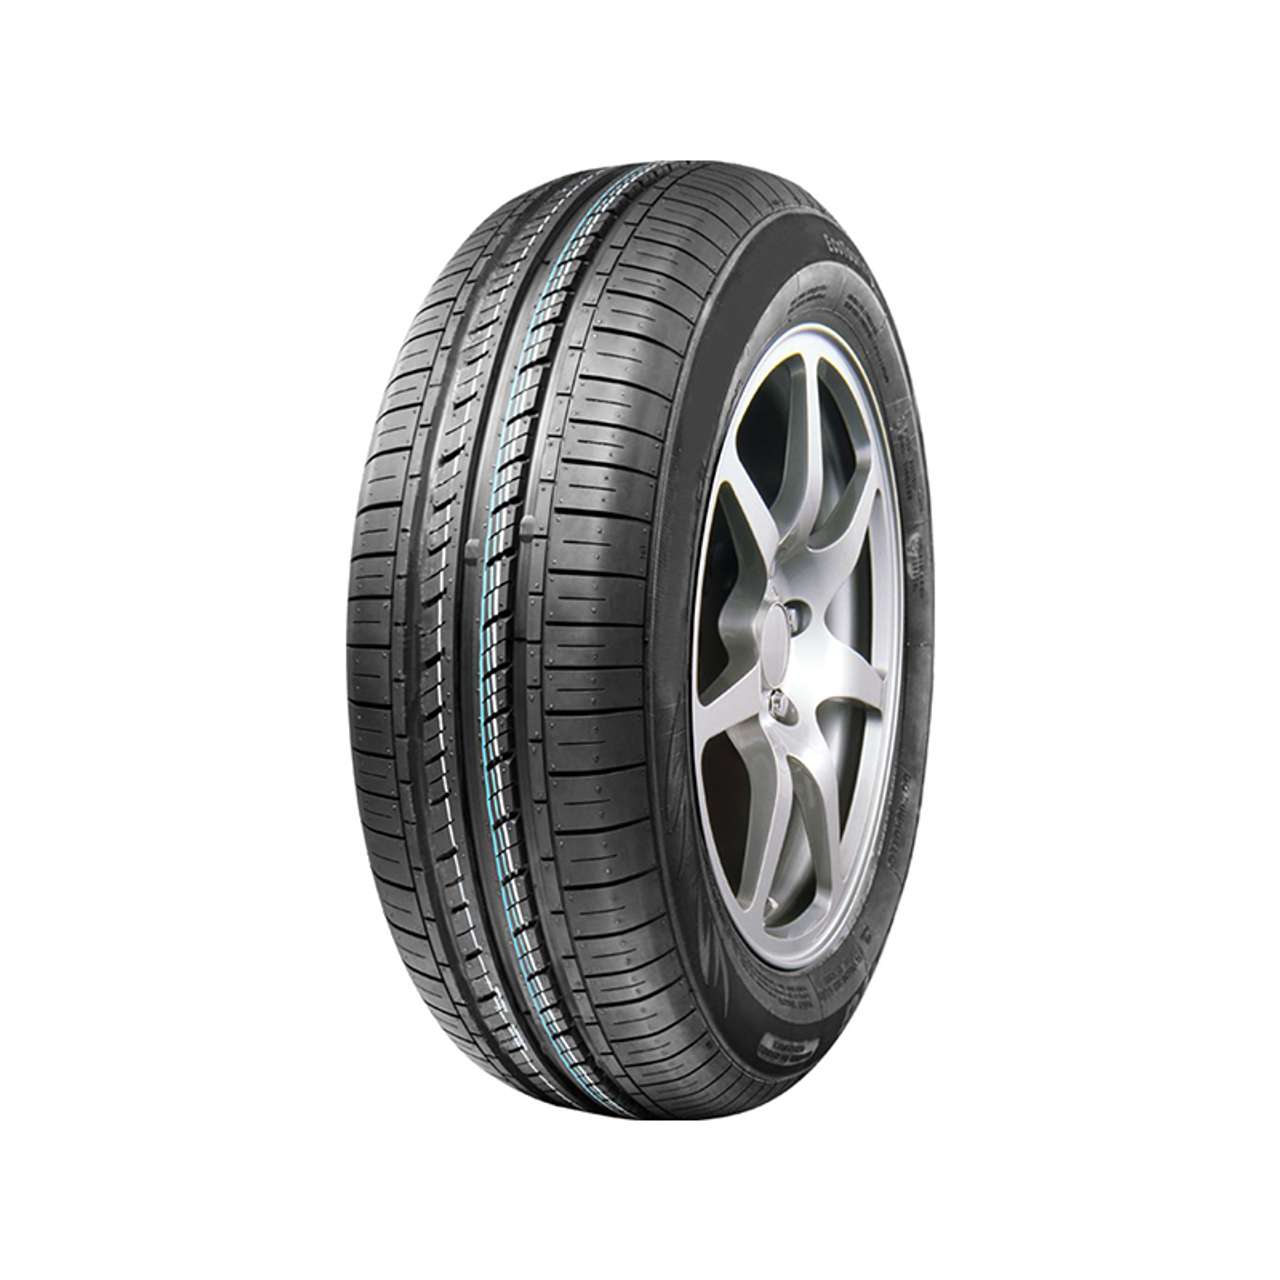 STAR PERFORMER COMET 155/65R14 75T BSW